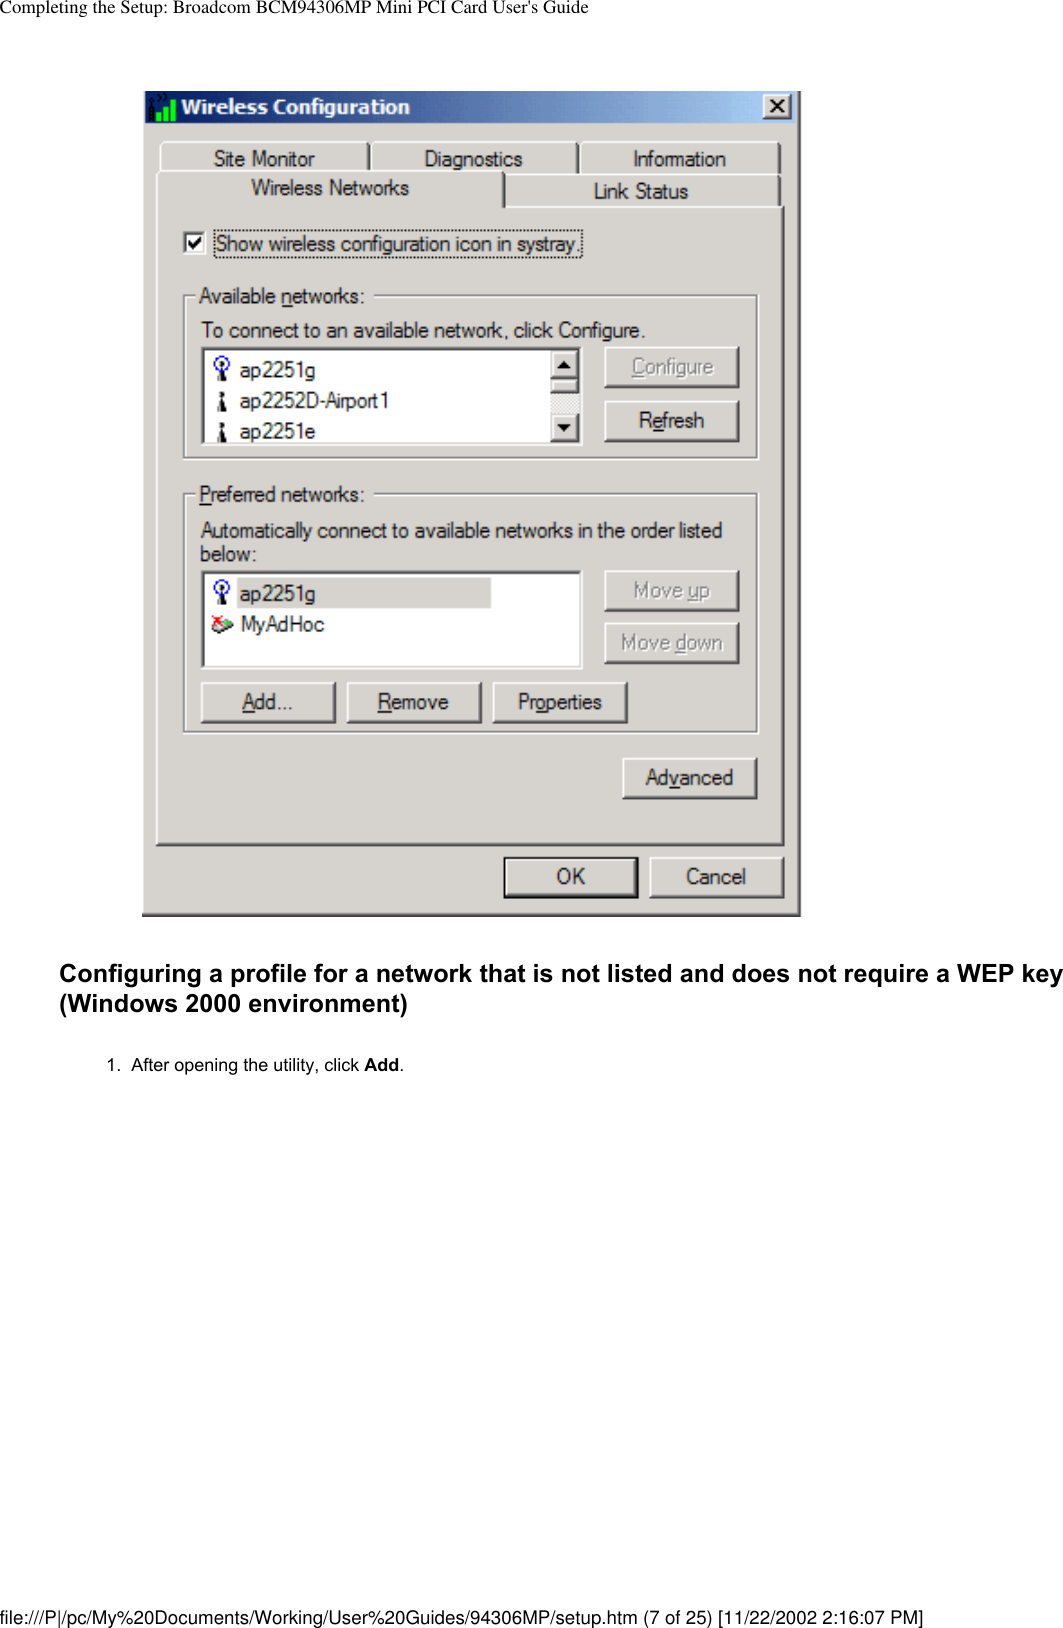 Completing the Setup: Broadcom BCM94306MP Mini PCI Card User&apos;s GuideConfiguring a profile for a network that is not listed and does not require a WEP key (Windows 2000 environment)1.  After opening the utility, click Add. file:///P|/pc/My%20Documents/Working/User%20Guides/94306MP/setup.htm (7 of 25) [11/22/2002 2:16:07 PM]